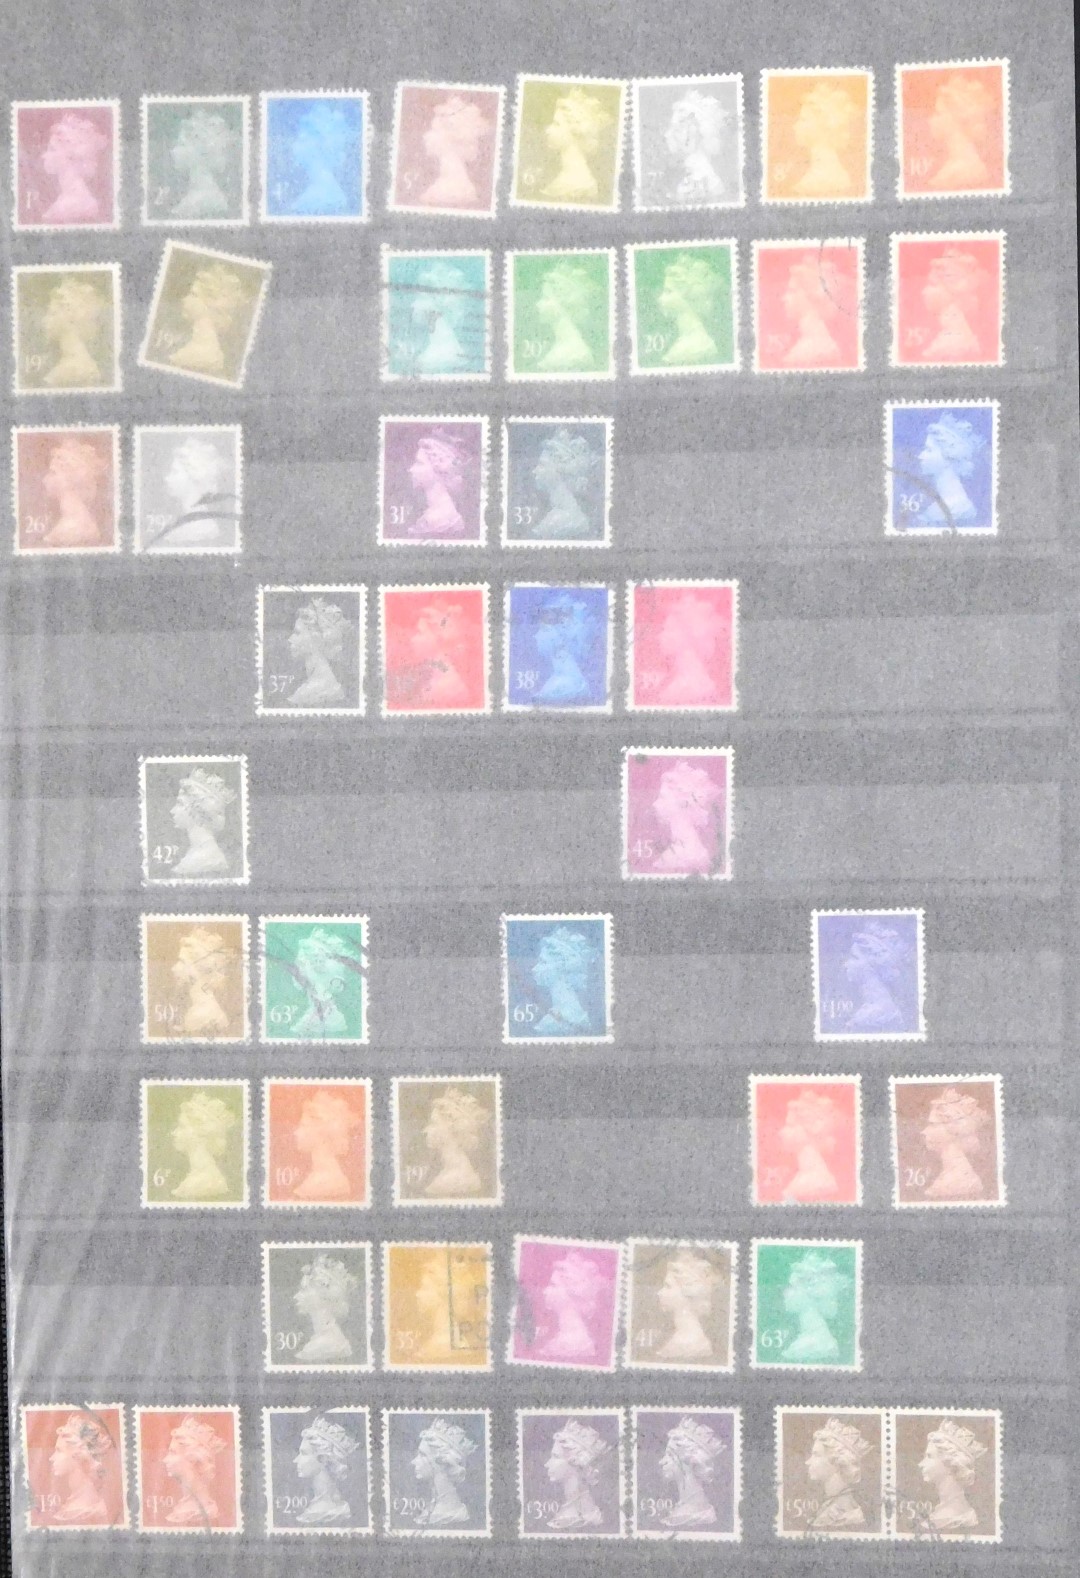 Philately. VR-EII definitives and commemoratives, mint and used, some repeats and first day covers, - Image 3 of 3